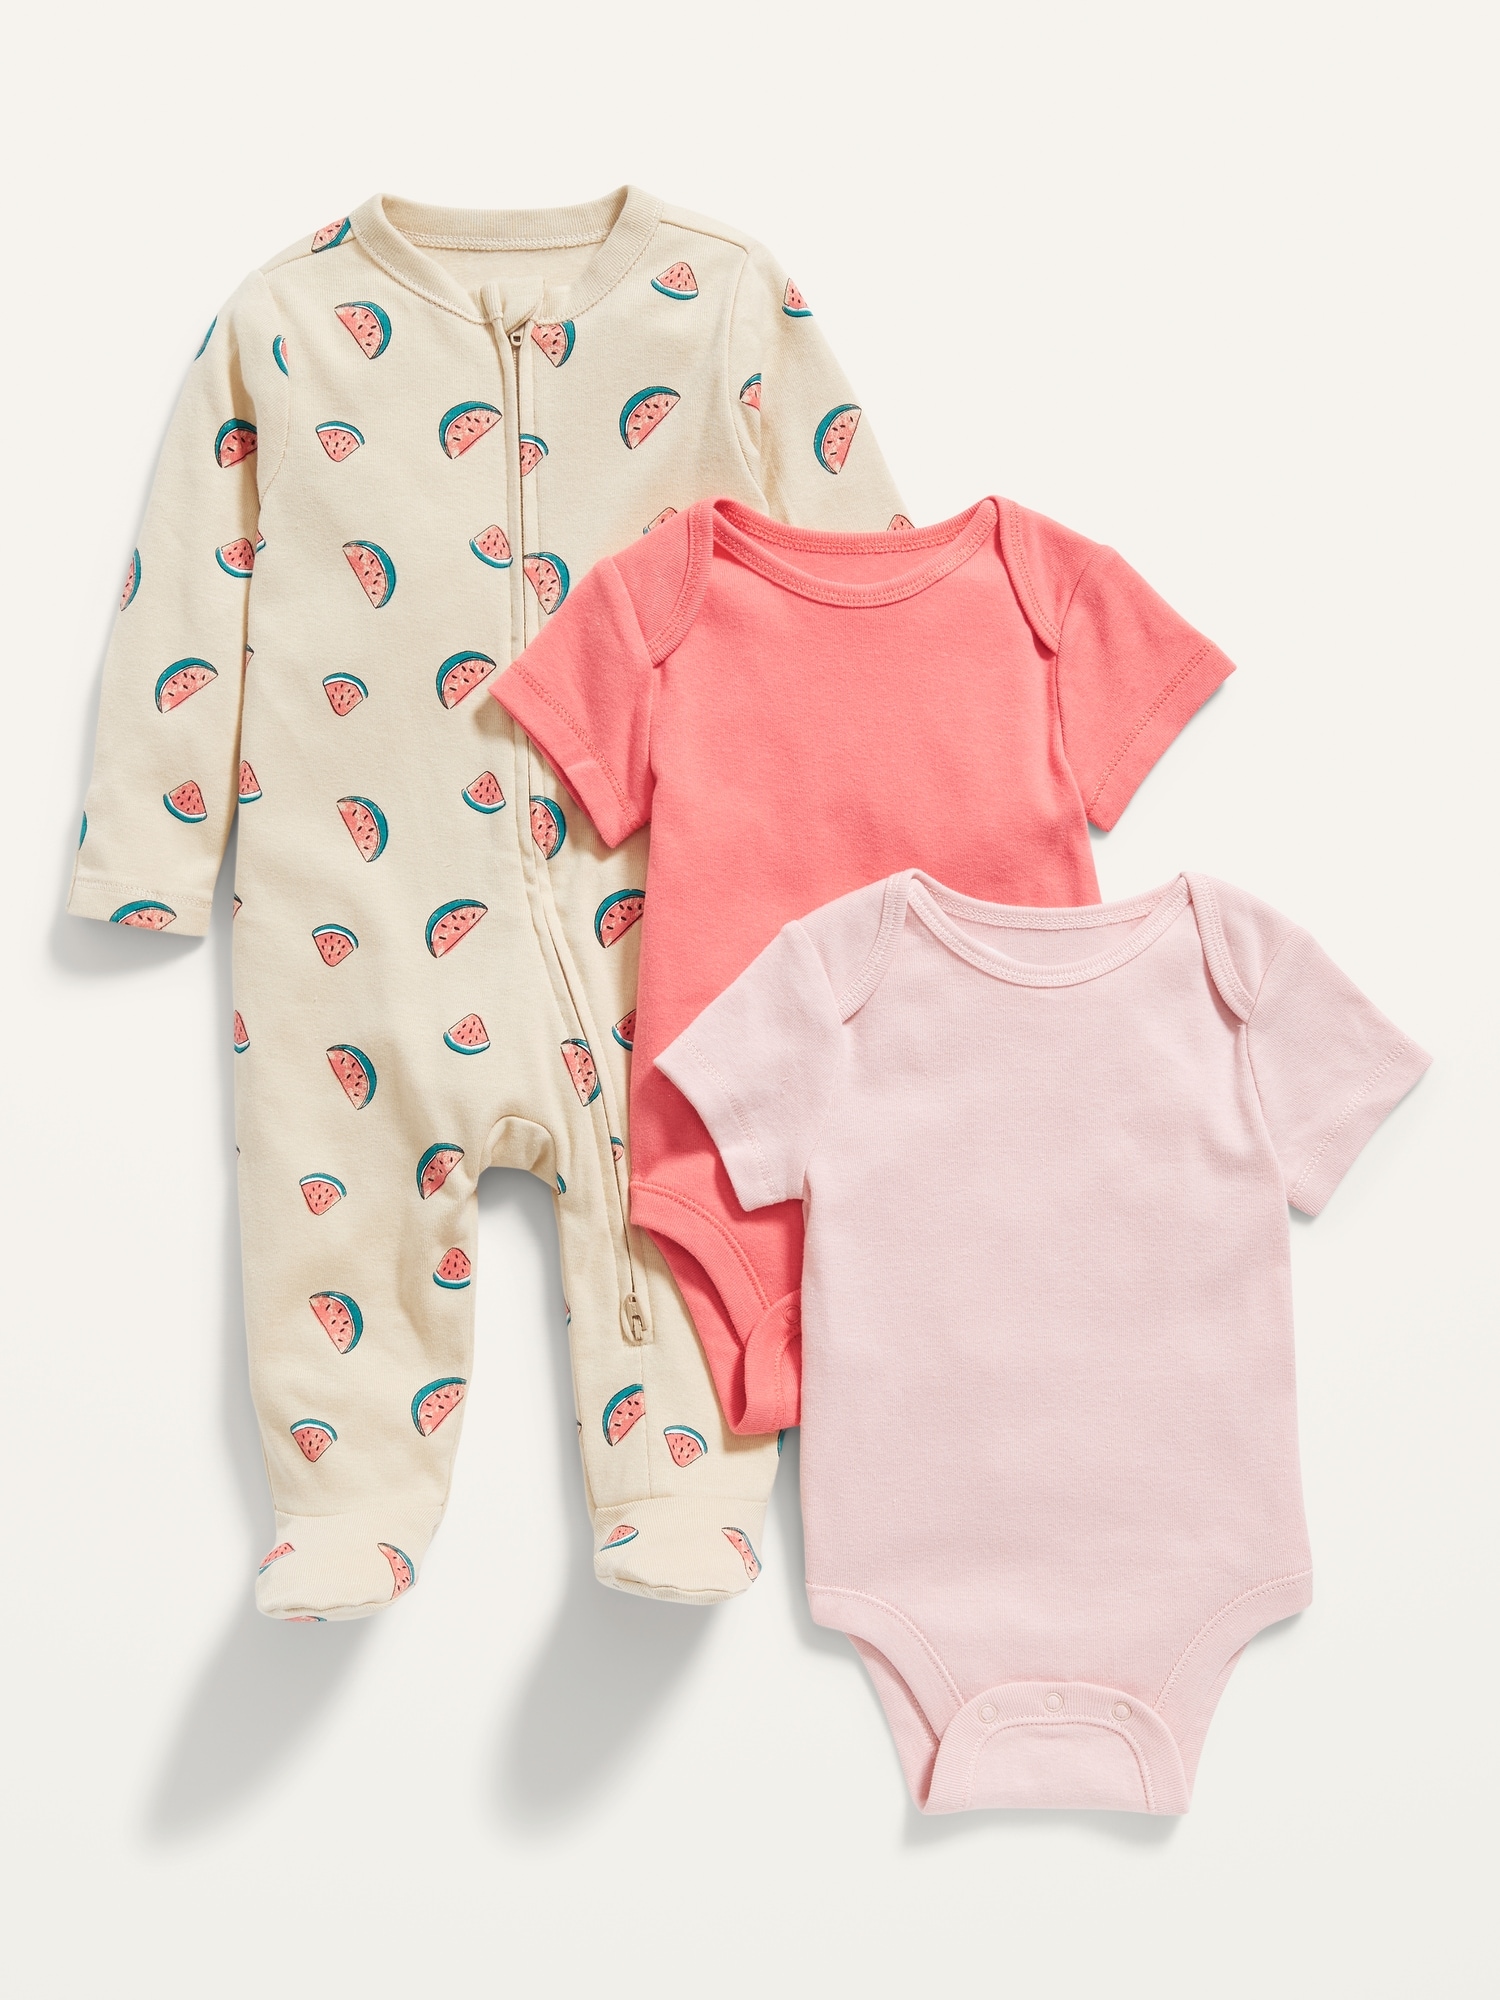 Unisex Sleep & Play Footed One-Piece and Bodysuit 3-Pack for Baby